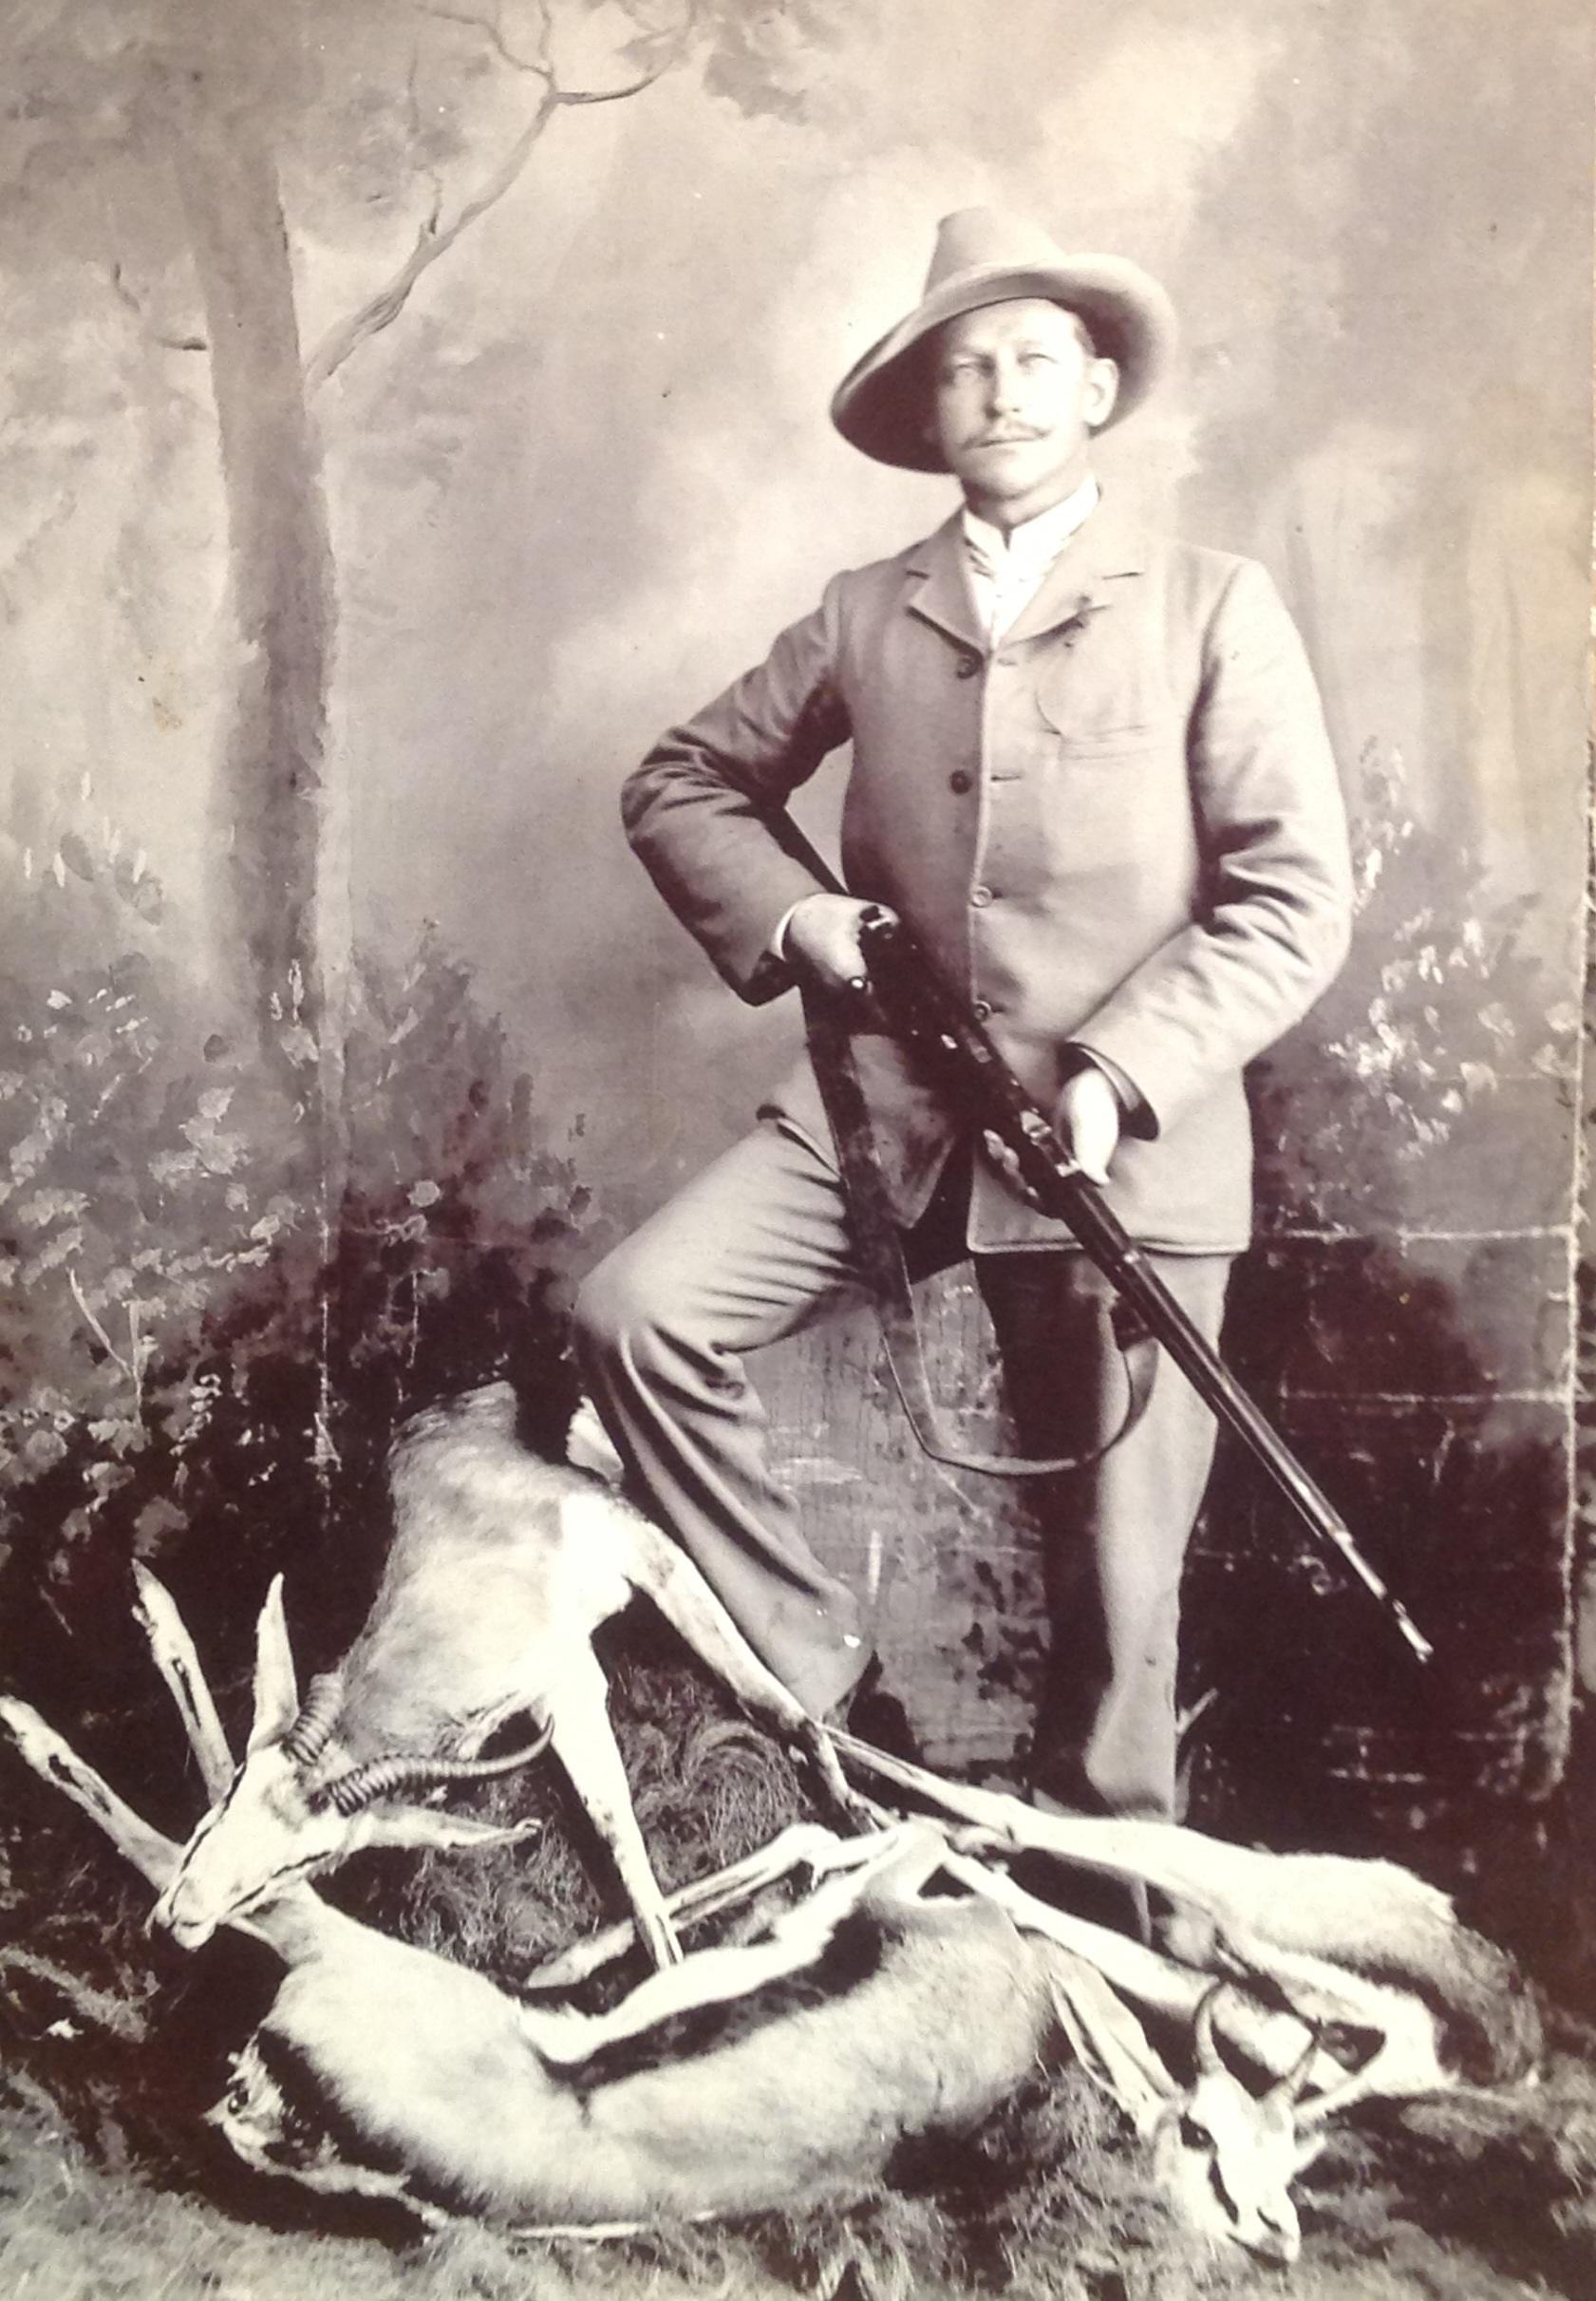 Hunter And Hunted Photographed Early South African Hunting Photographs 1860s To 1910 The